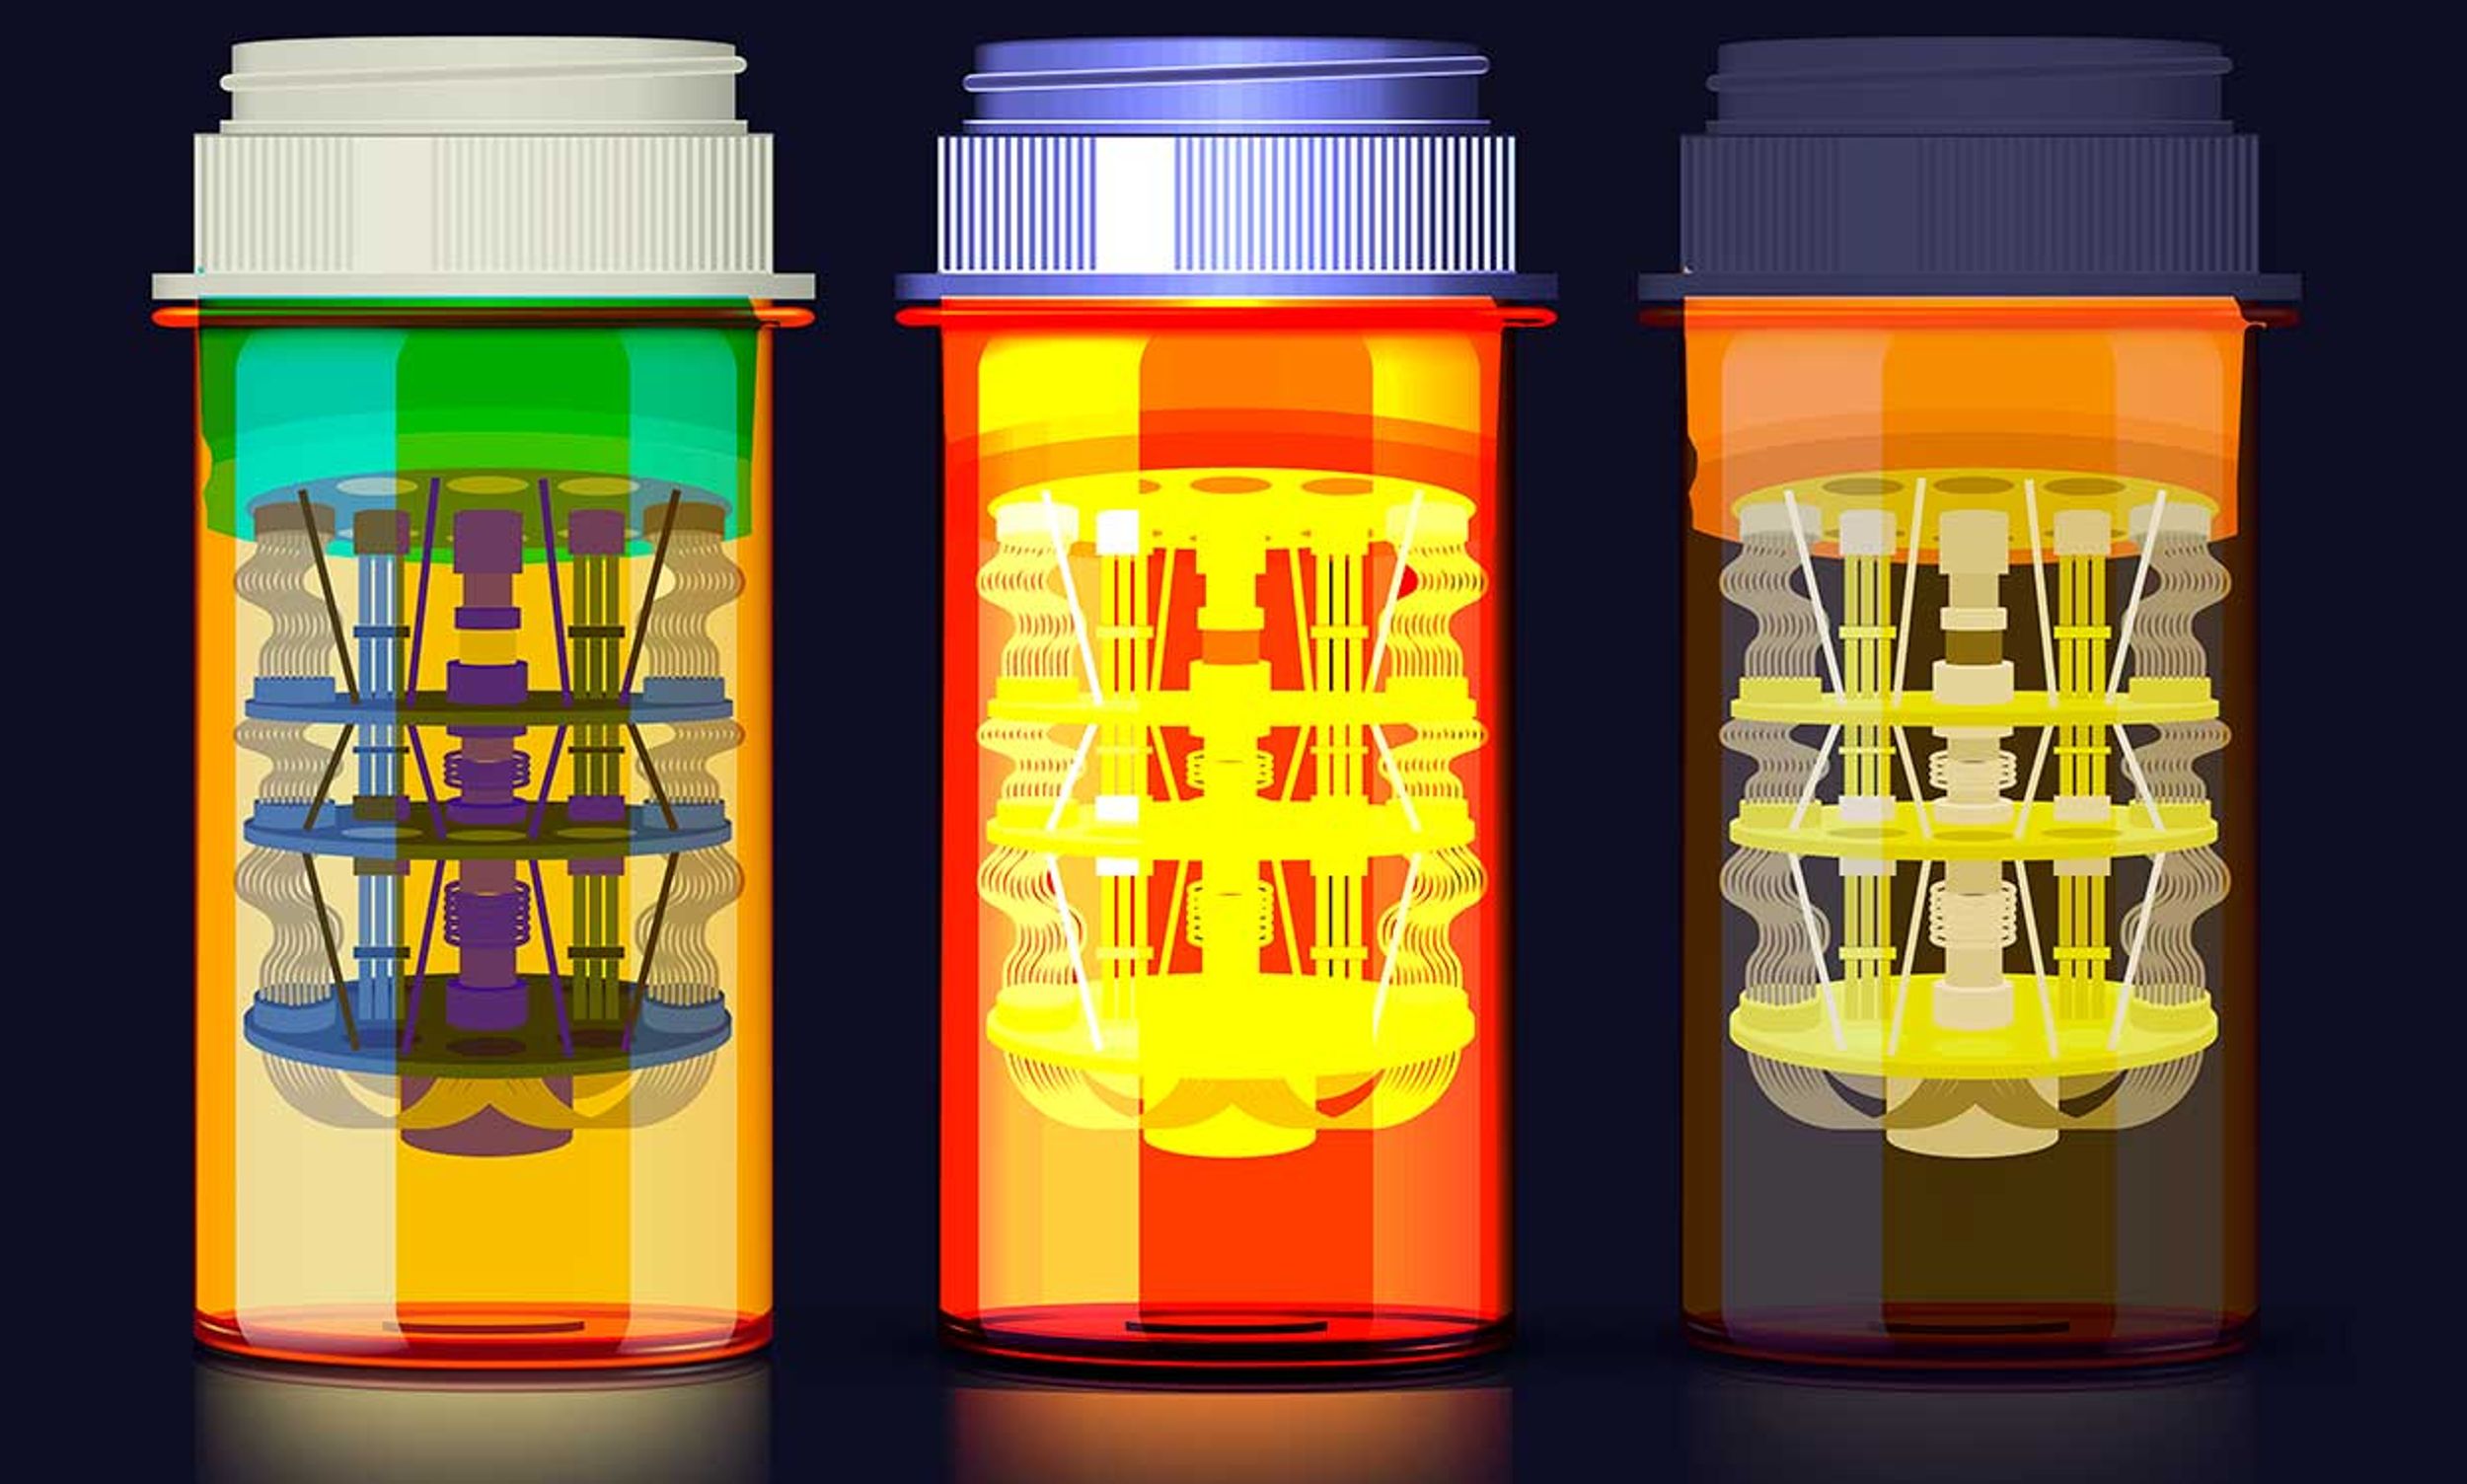 Illustration of pill bottles with quantum computer technology inside